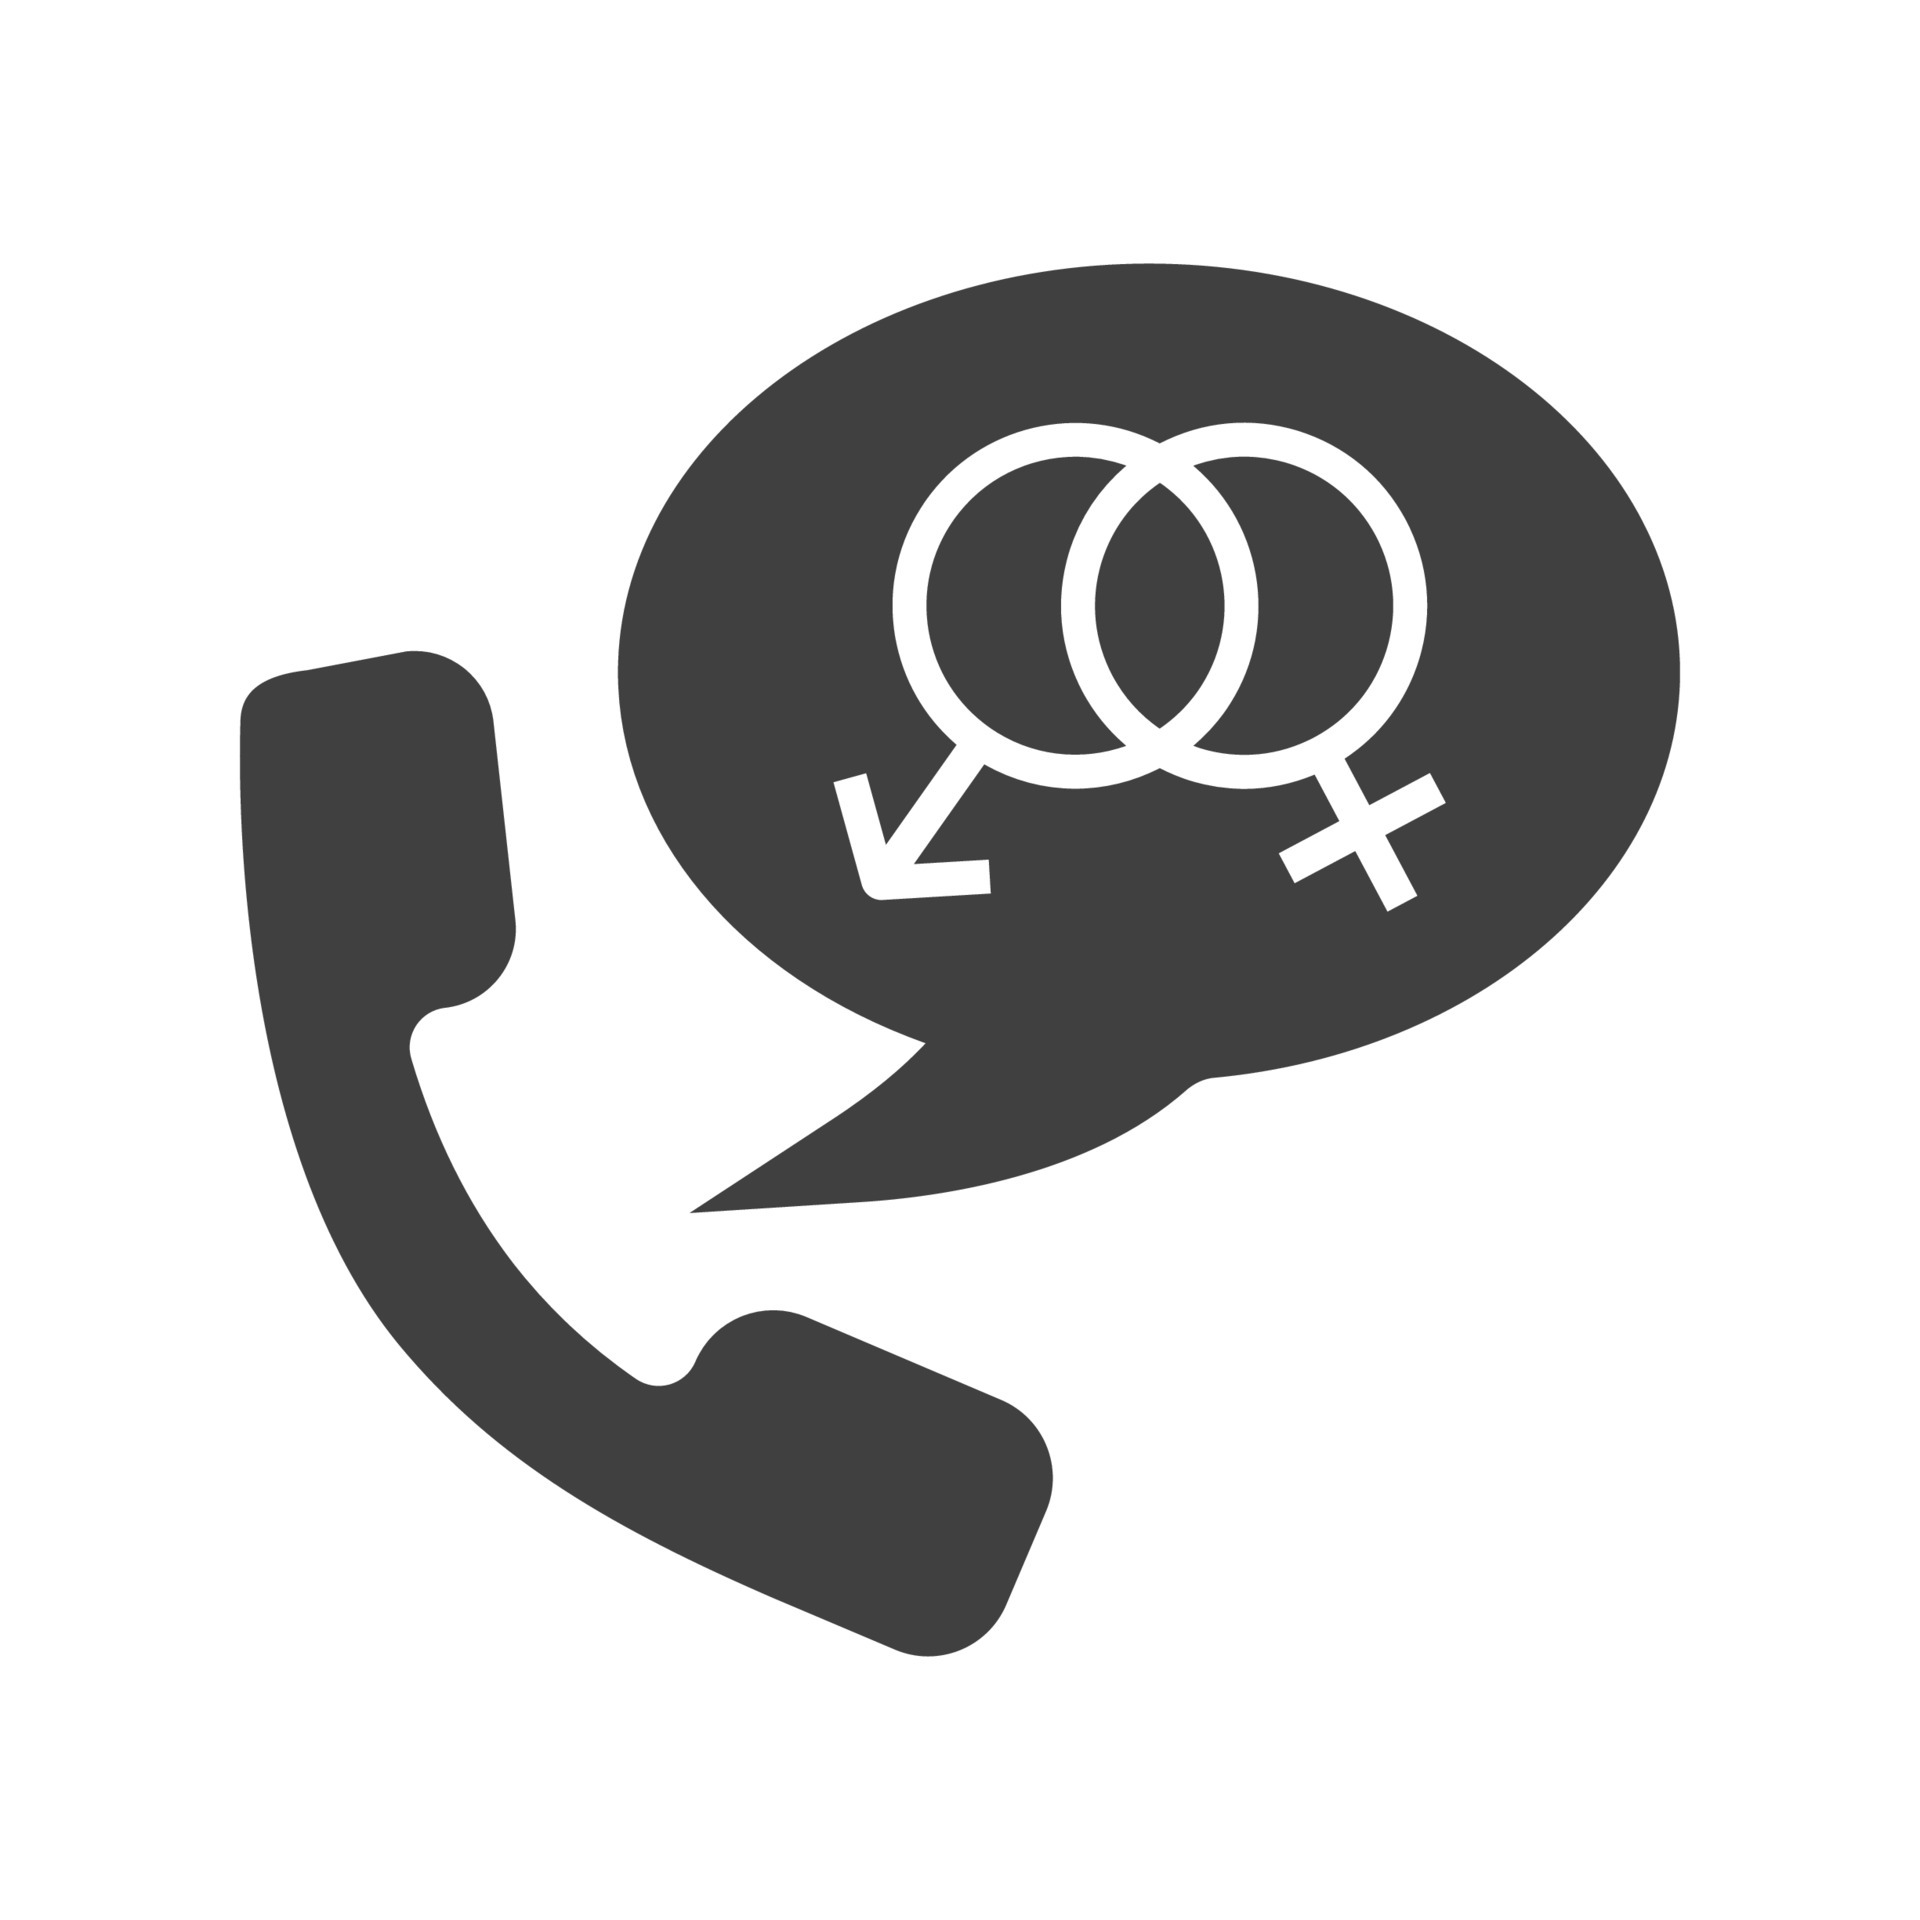 Phone sex glyph icon. Silhouette symbol. Handset with man and woman gender signs inside speech bubble picture